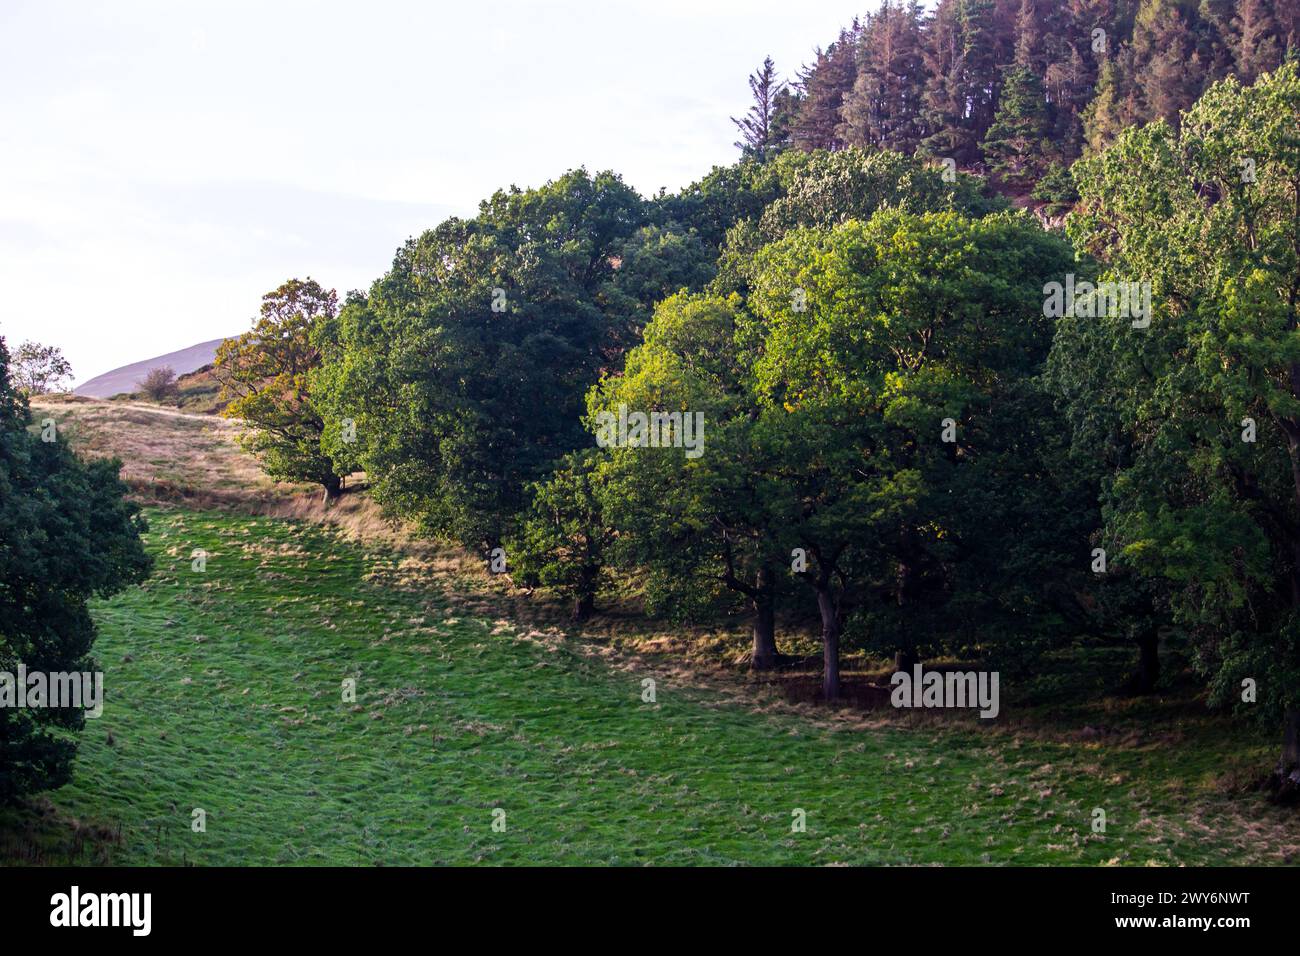 Broadleaf woodland along the edges of the pastures in the golden late afternoon light in the Clwydian Range in Wales Stock Photo